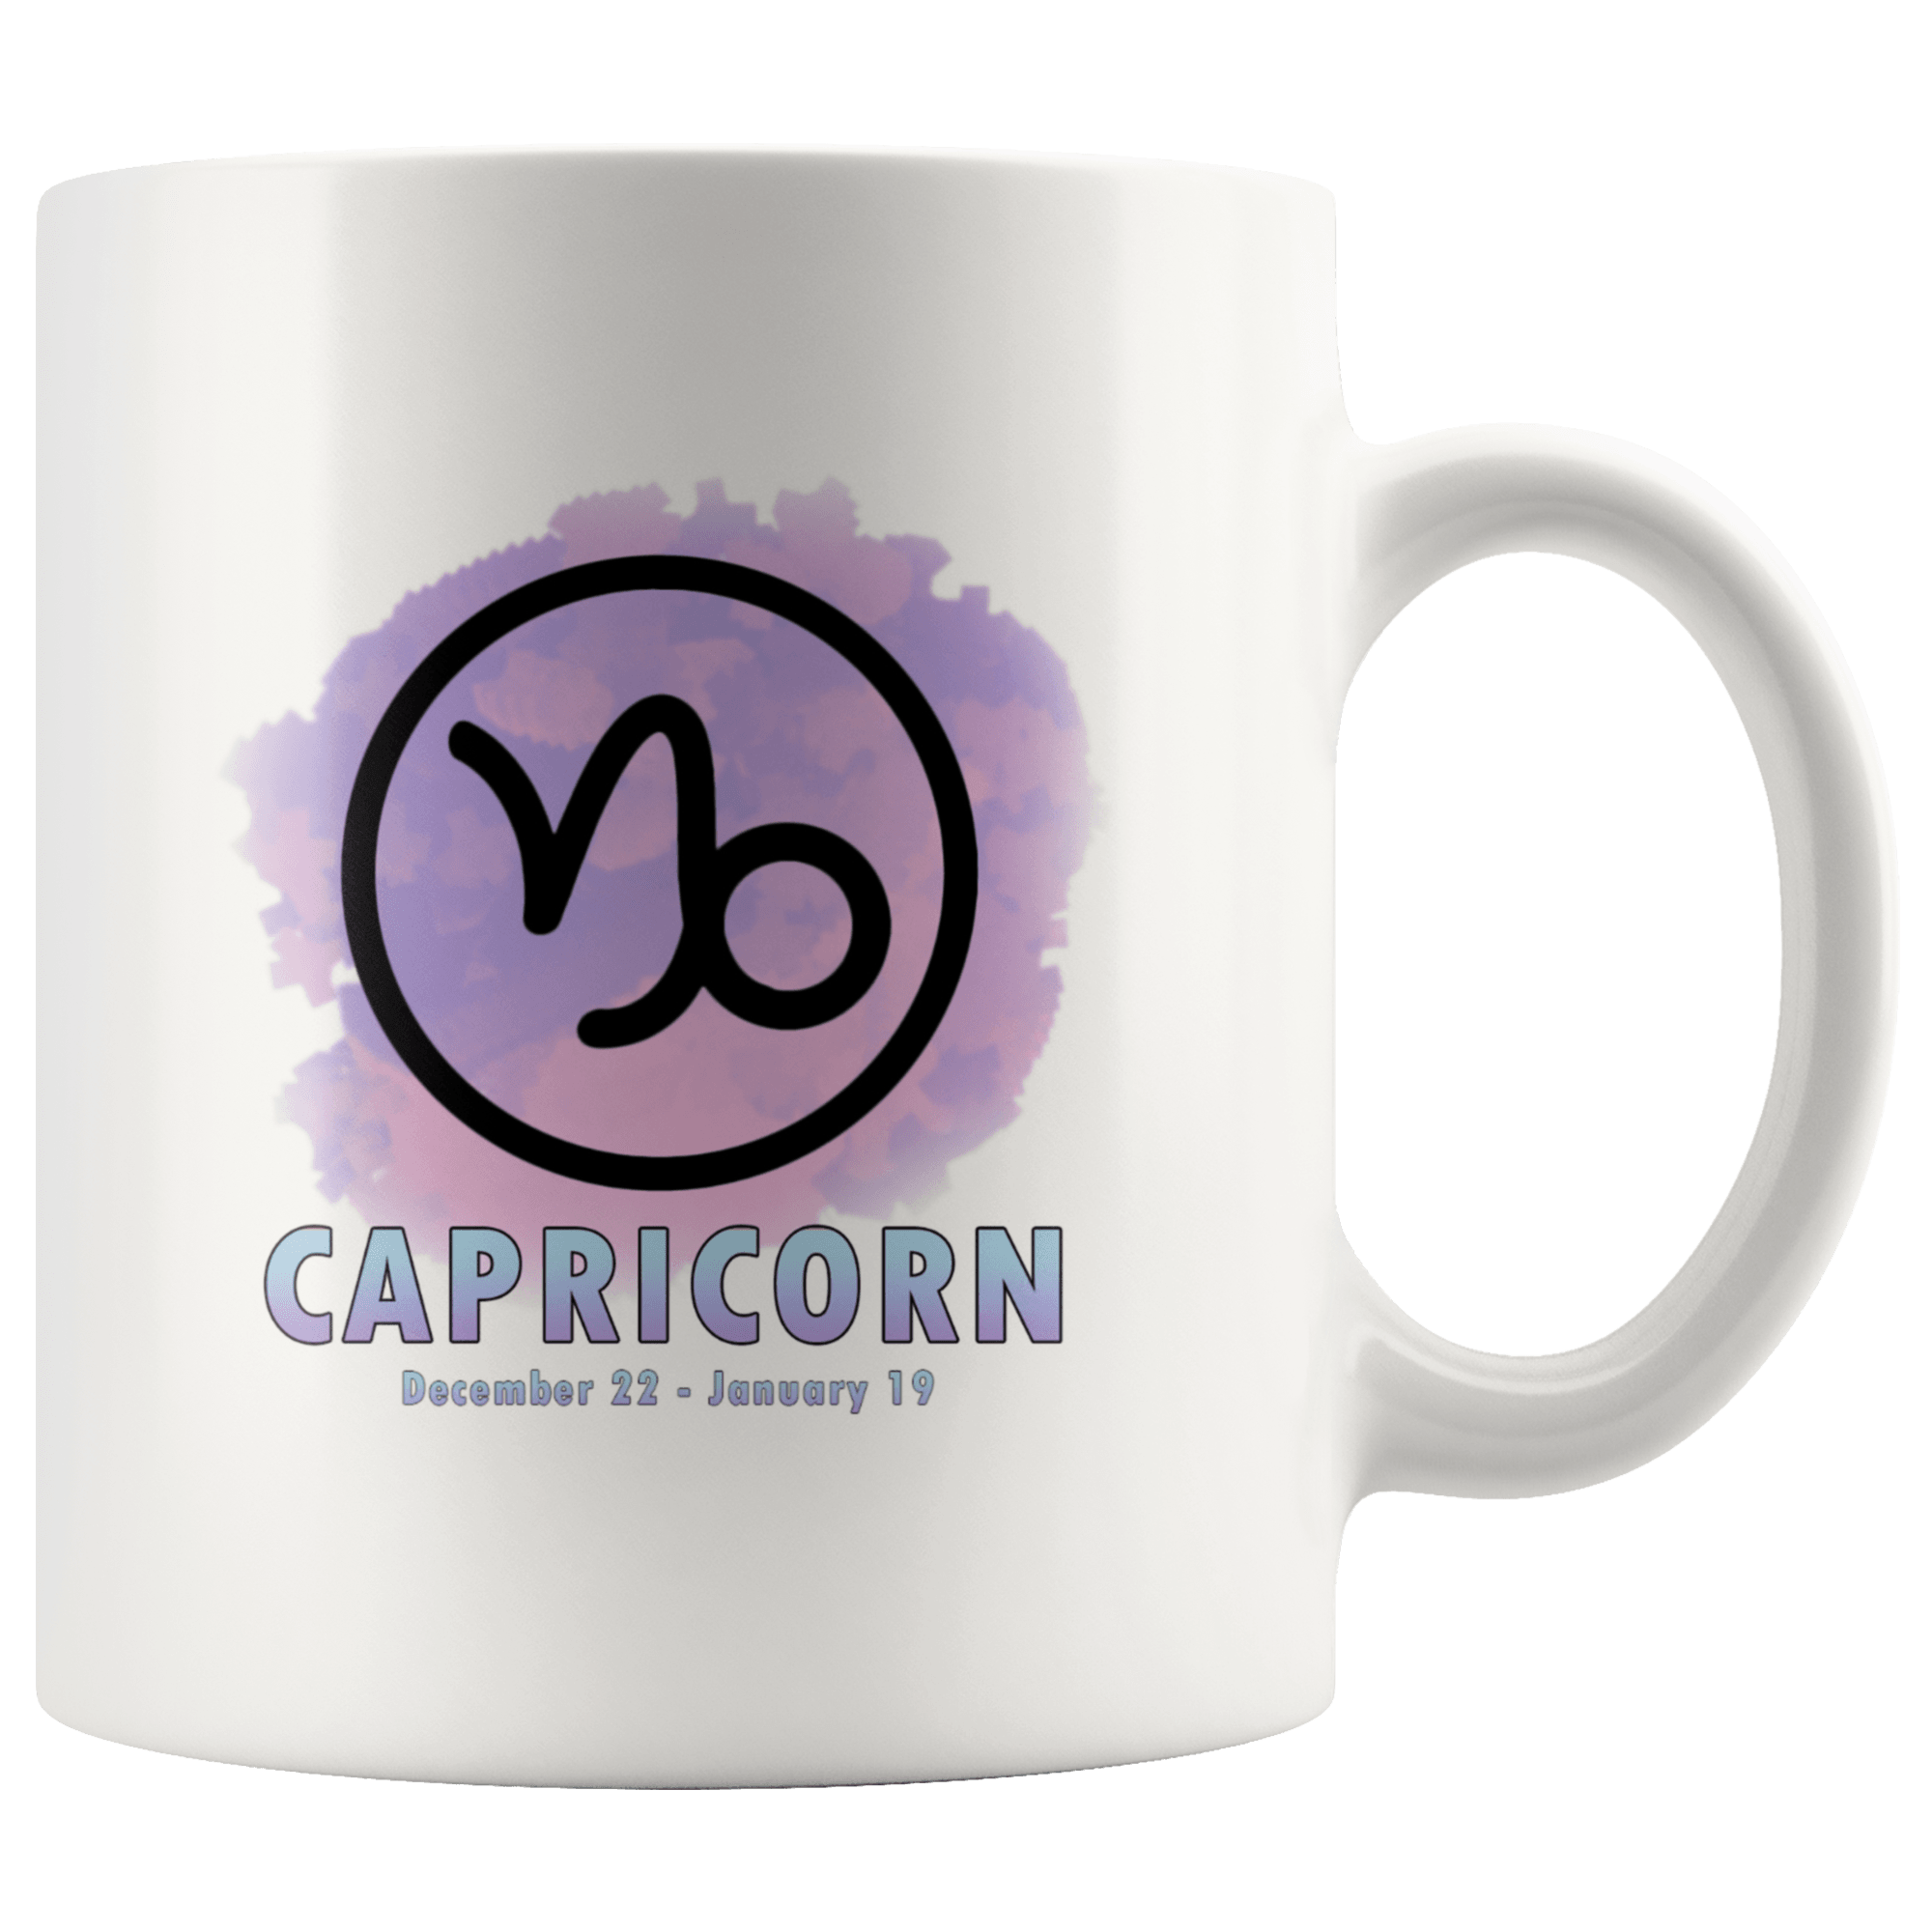 Capricorn Coffee Mug - Capricorn Constellation Coffee Cup - Zodiac Gifts For Horoscope Lover Born in December or January - SPCM